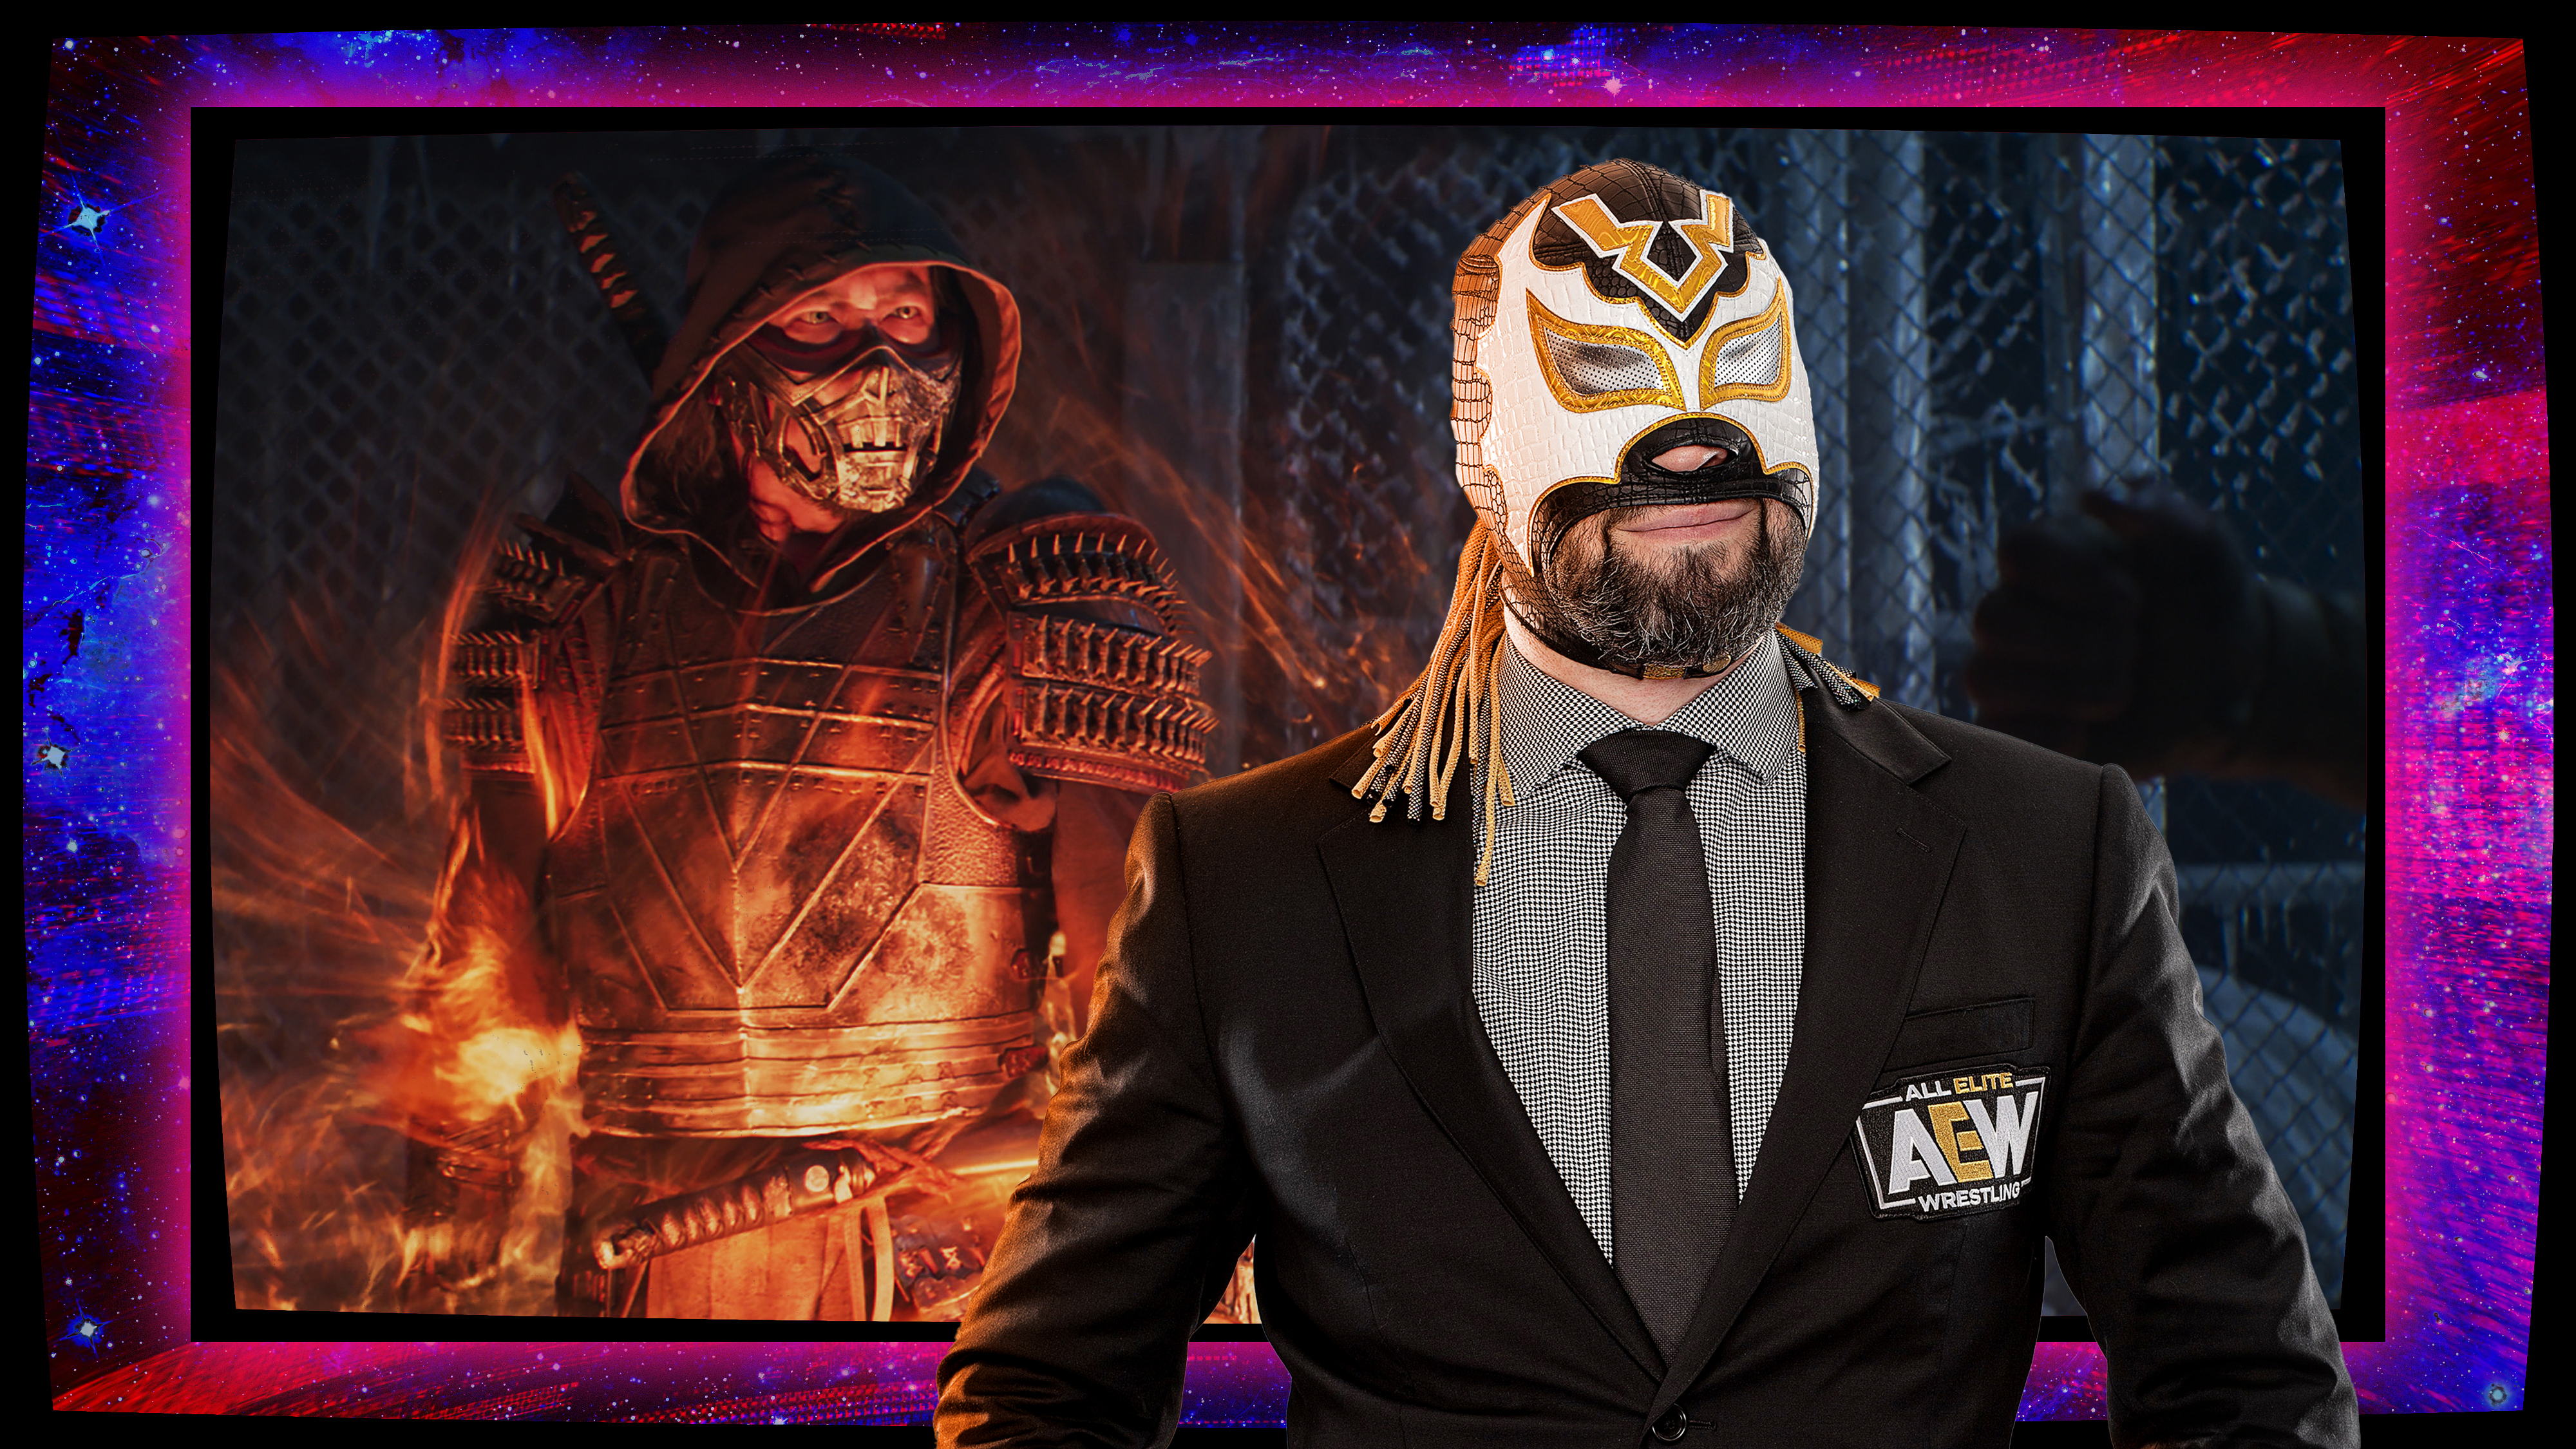 Man wearing a suit and wrestling mask stands in front of an image from the Mortal Kombat movie.